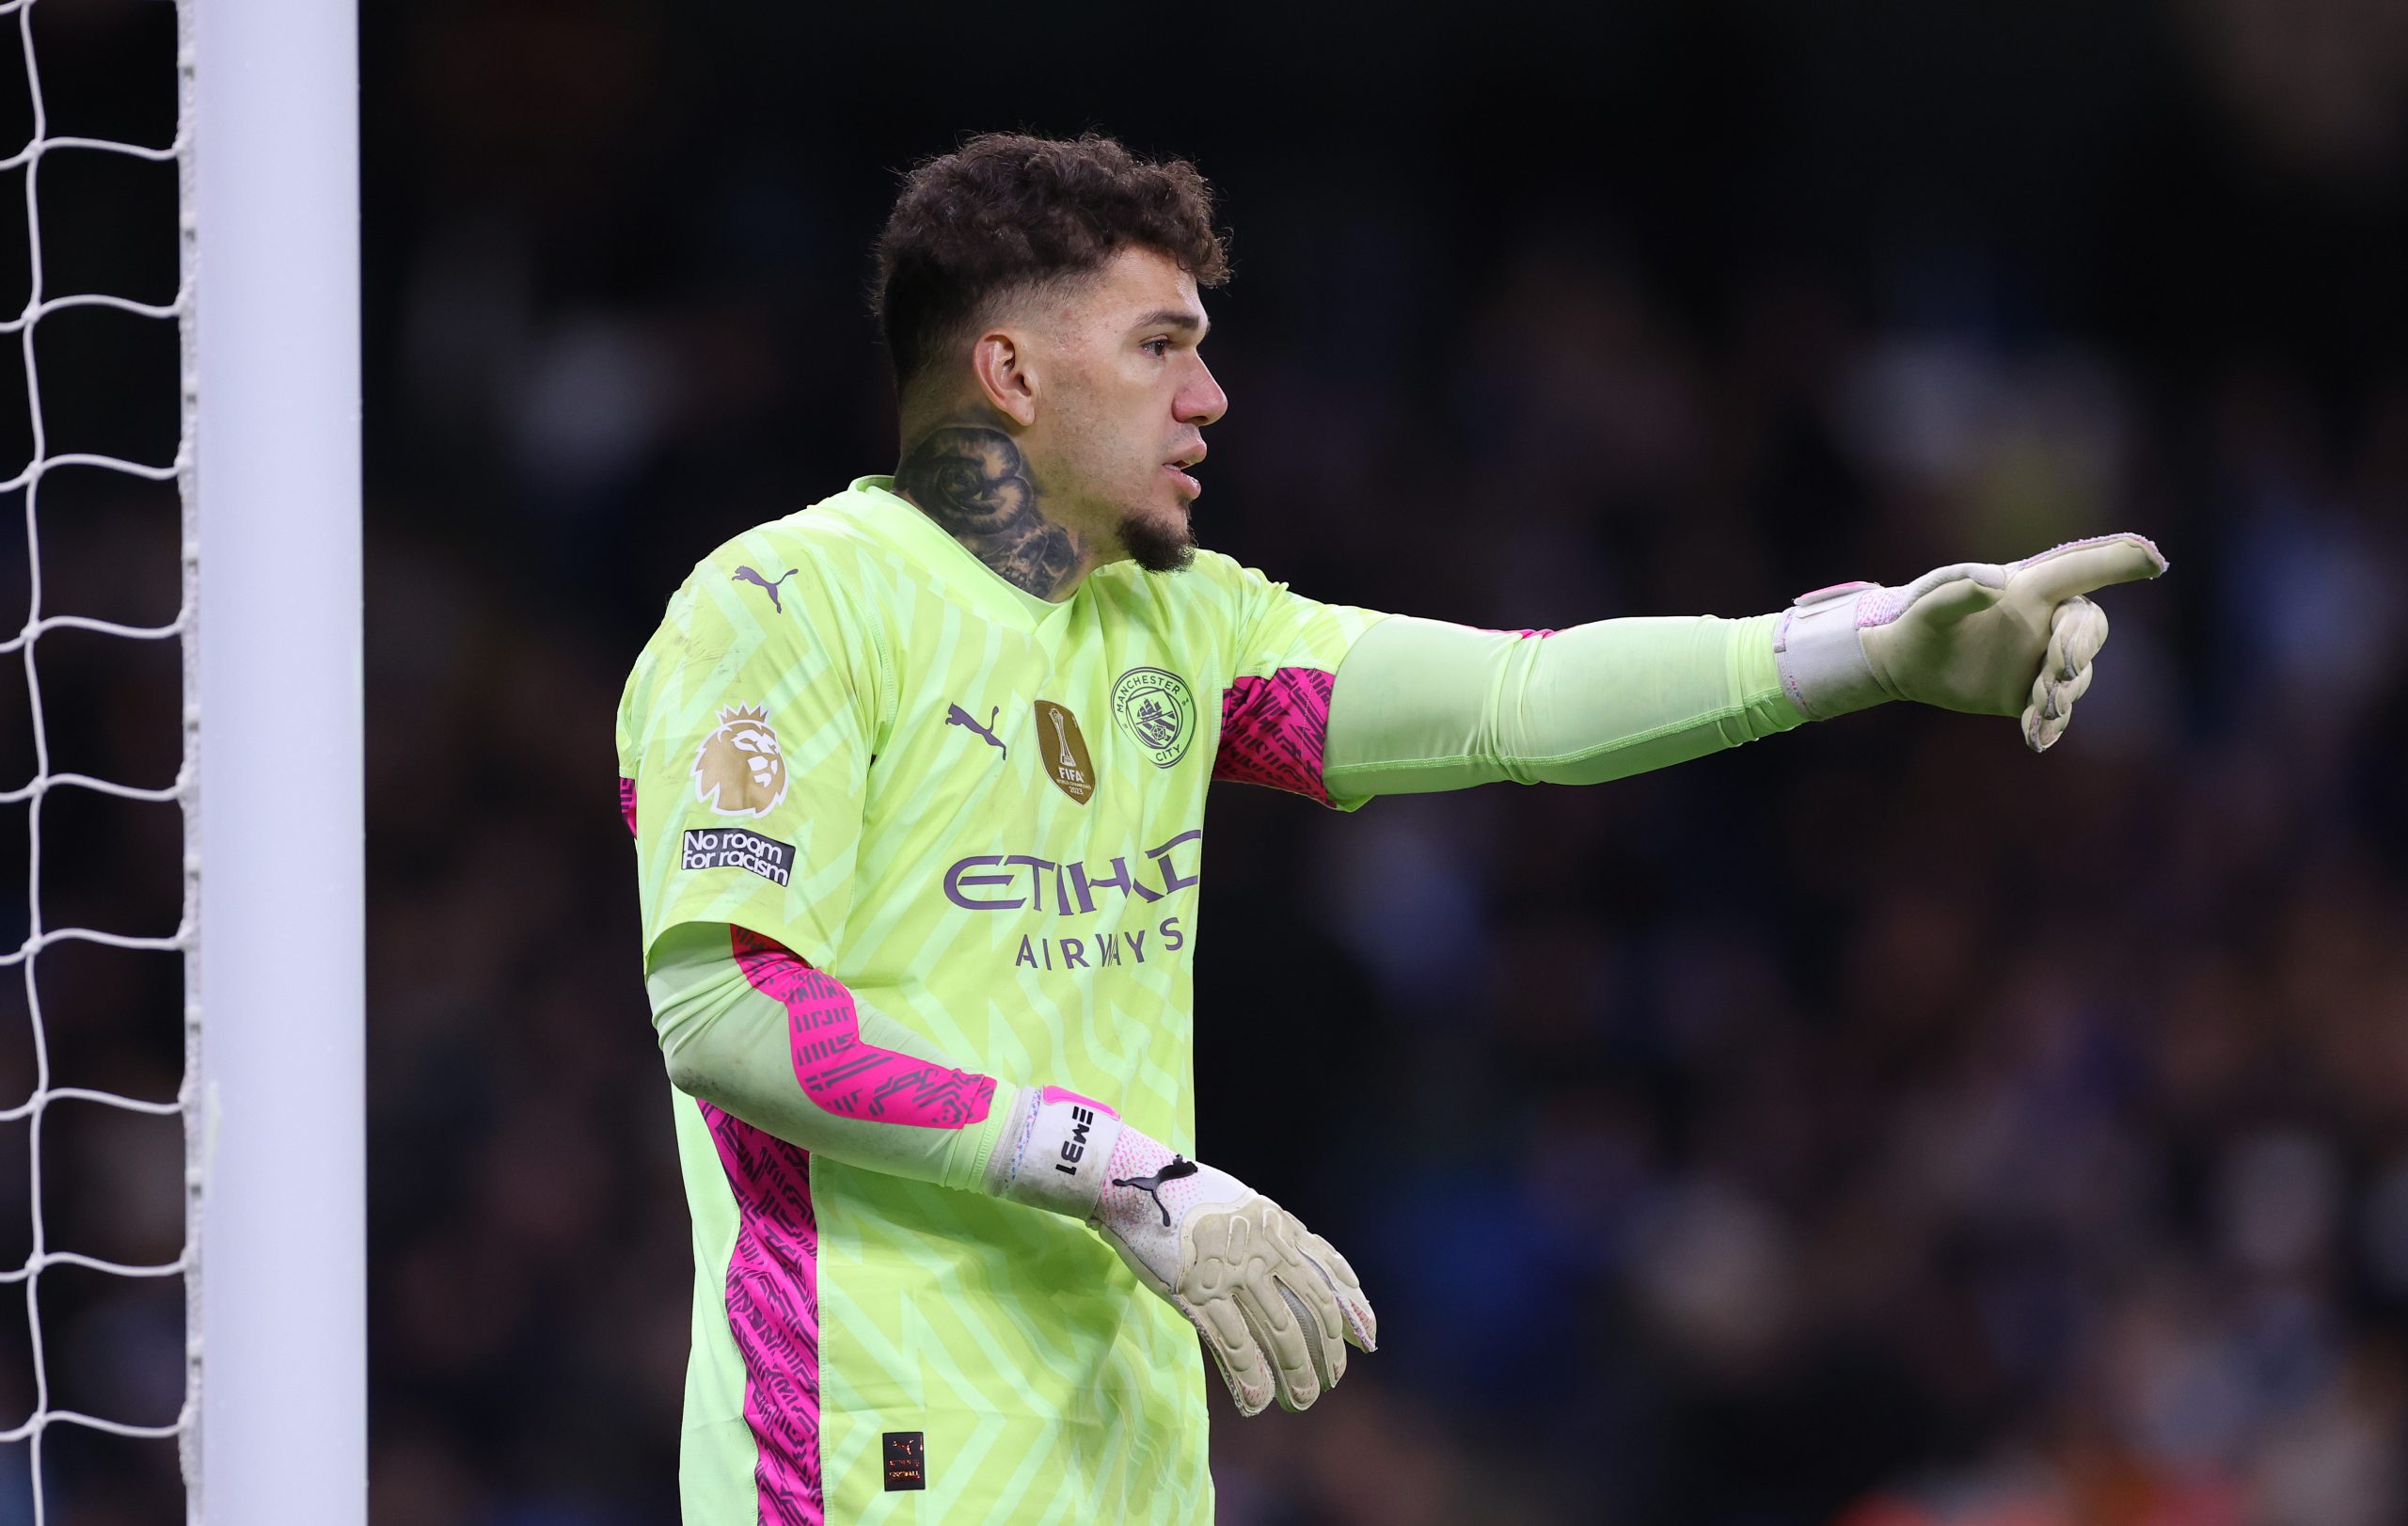 Manchester City goalkeeper Ederson praises Tottenham Hotspur but still leaves them out of the title-contender zone.